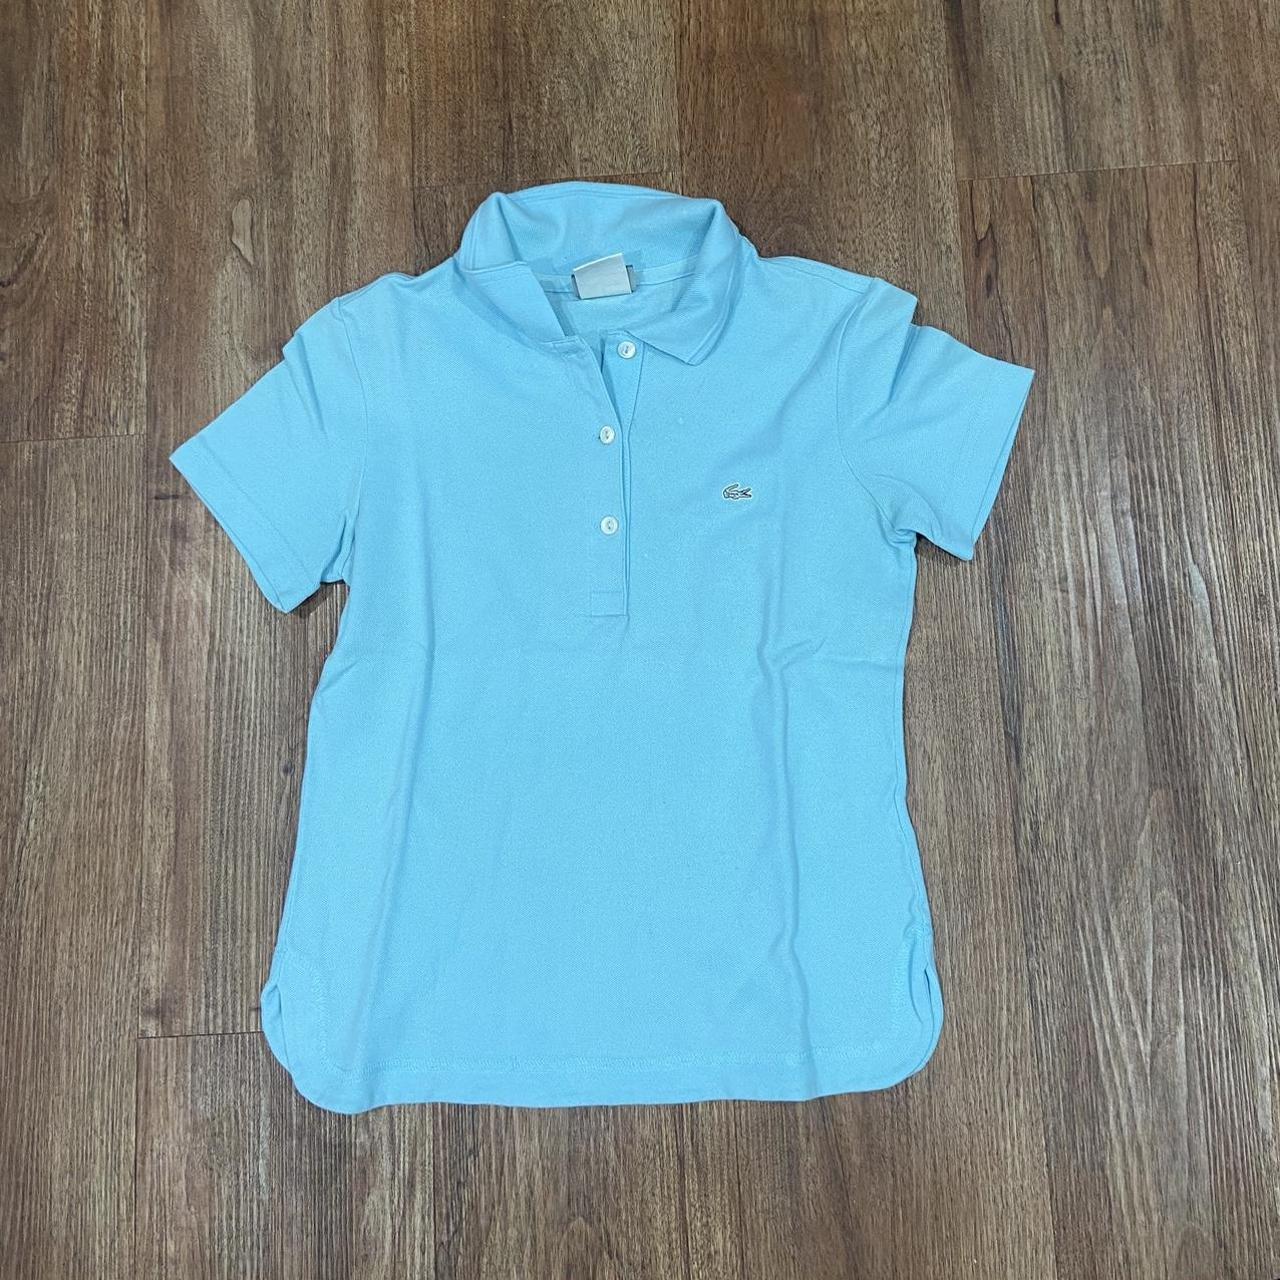 Lacoste baby blue polo - free shipping - barely... - Depop